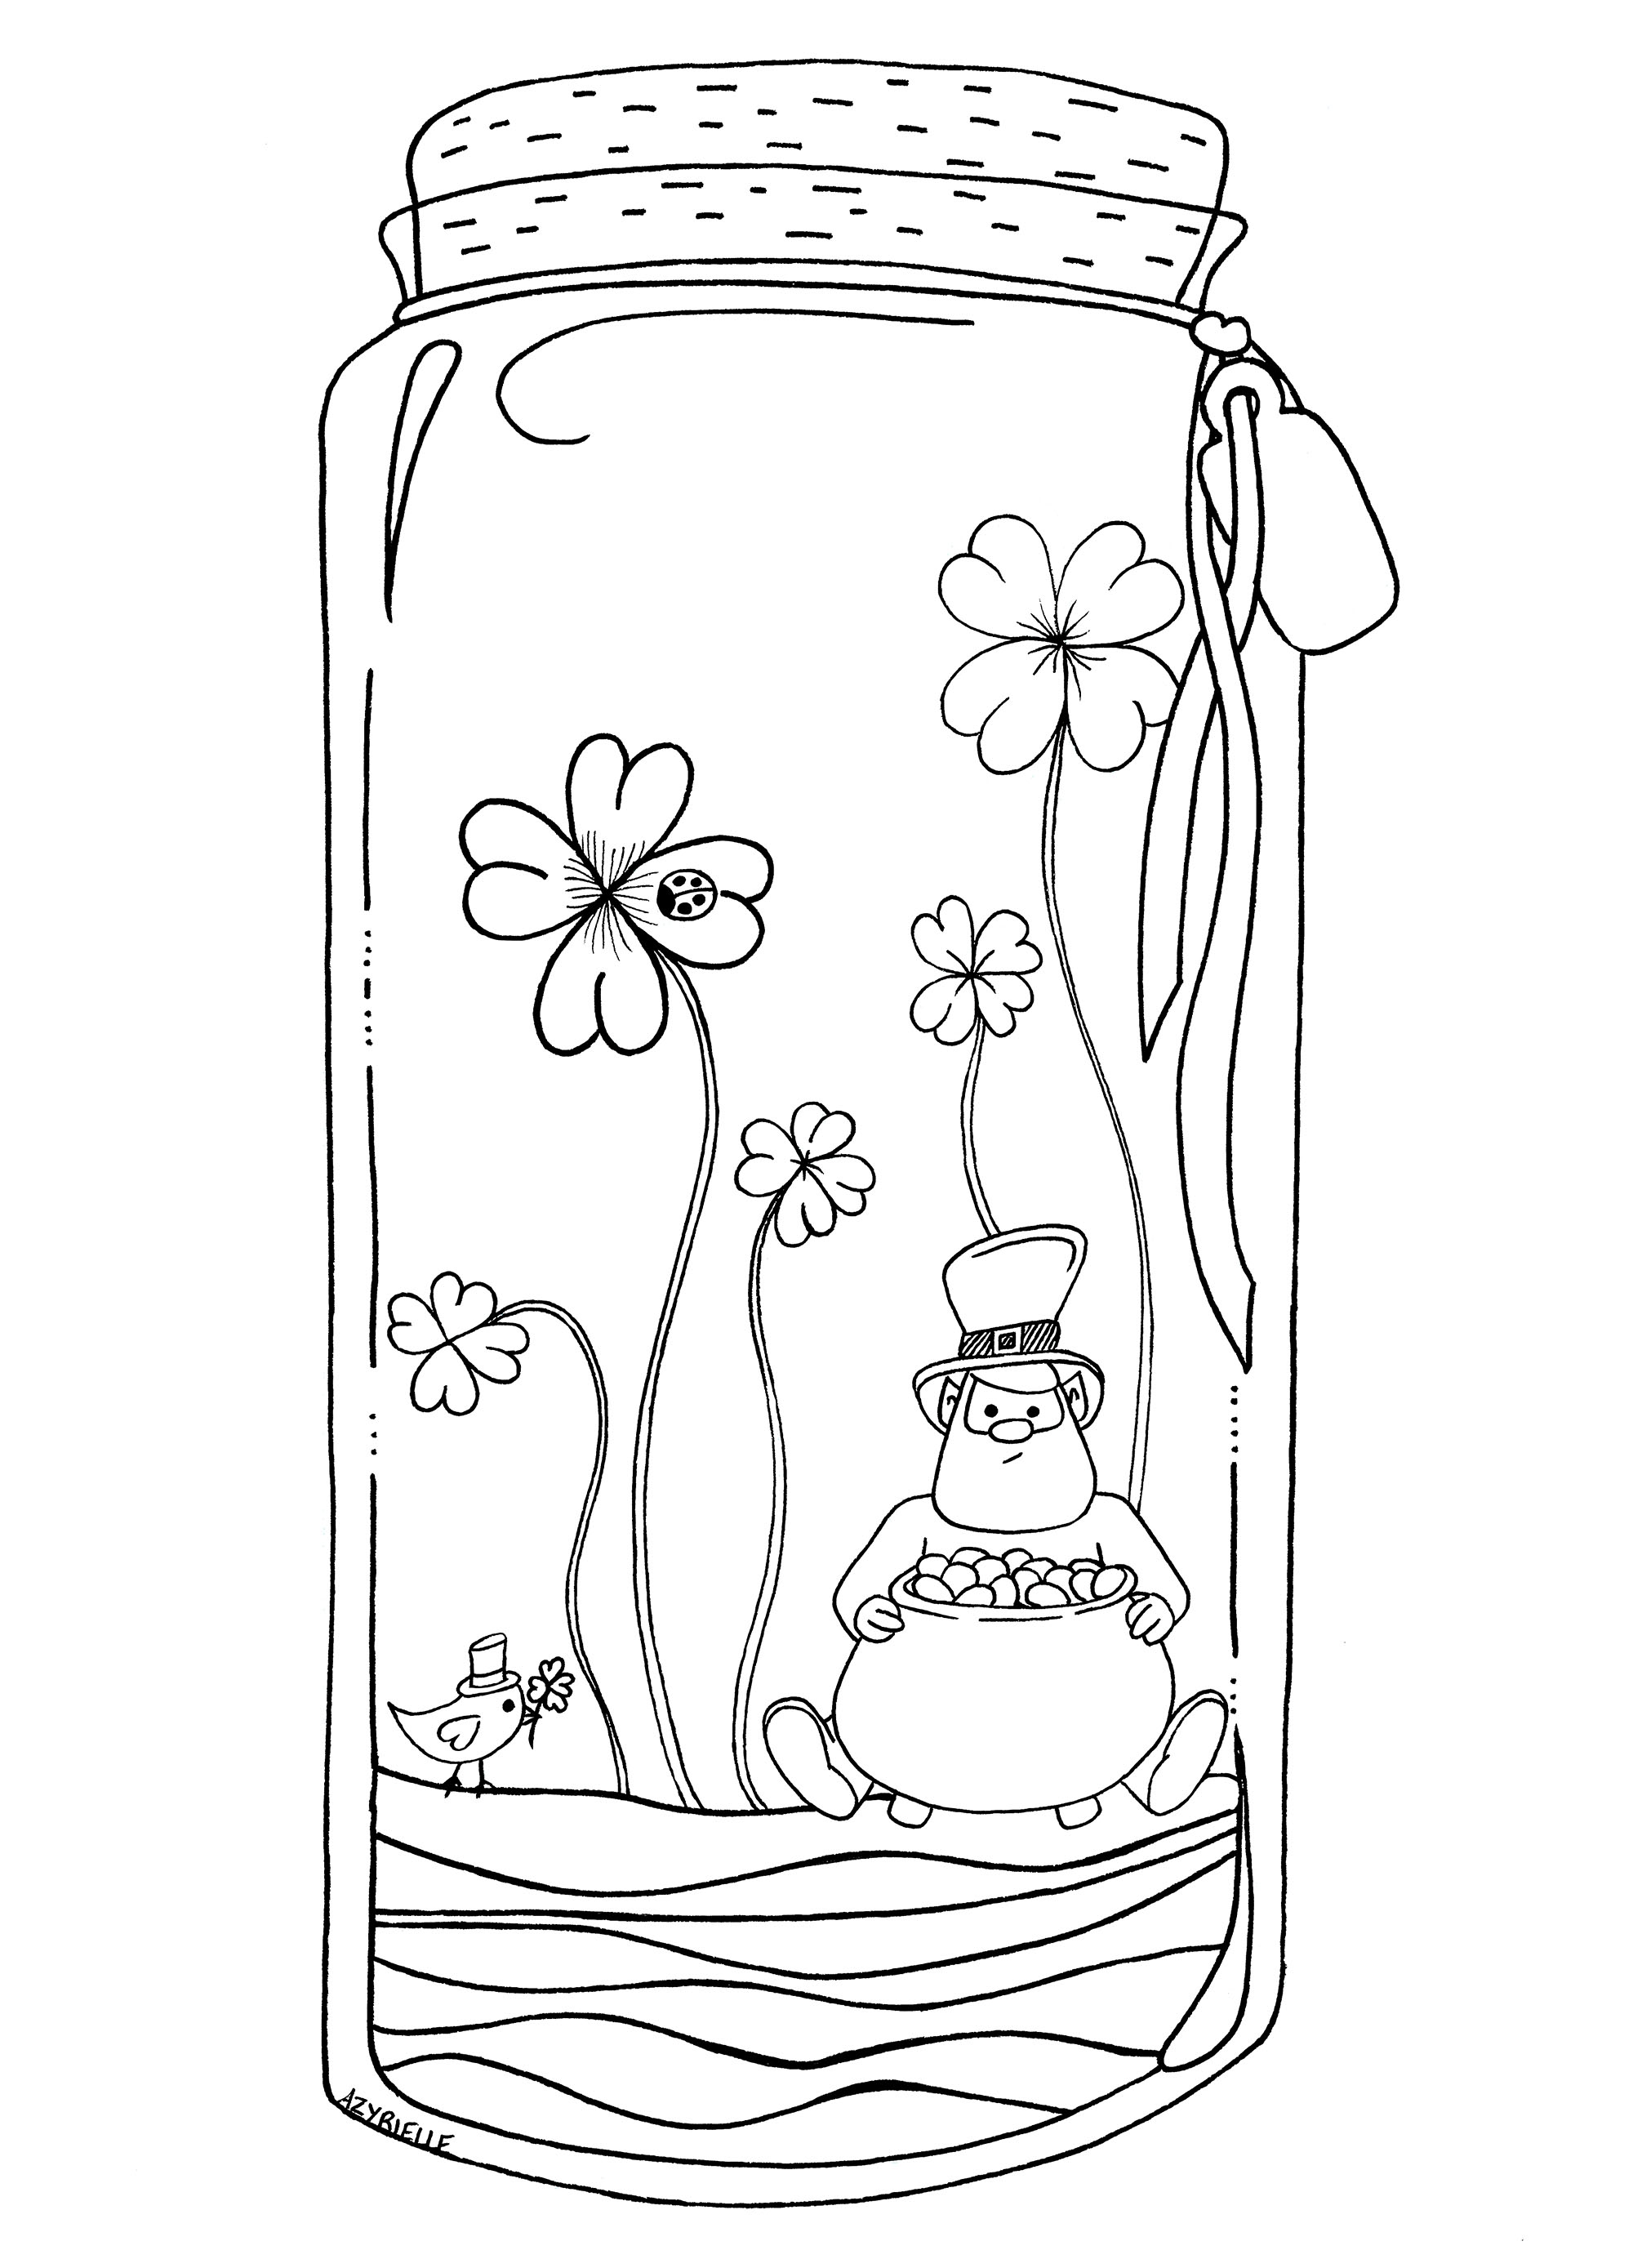 Cute and simple coloring page to celebrate Saint Patrick's Day